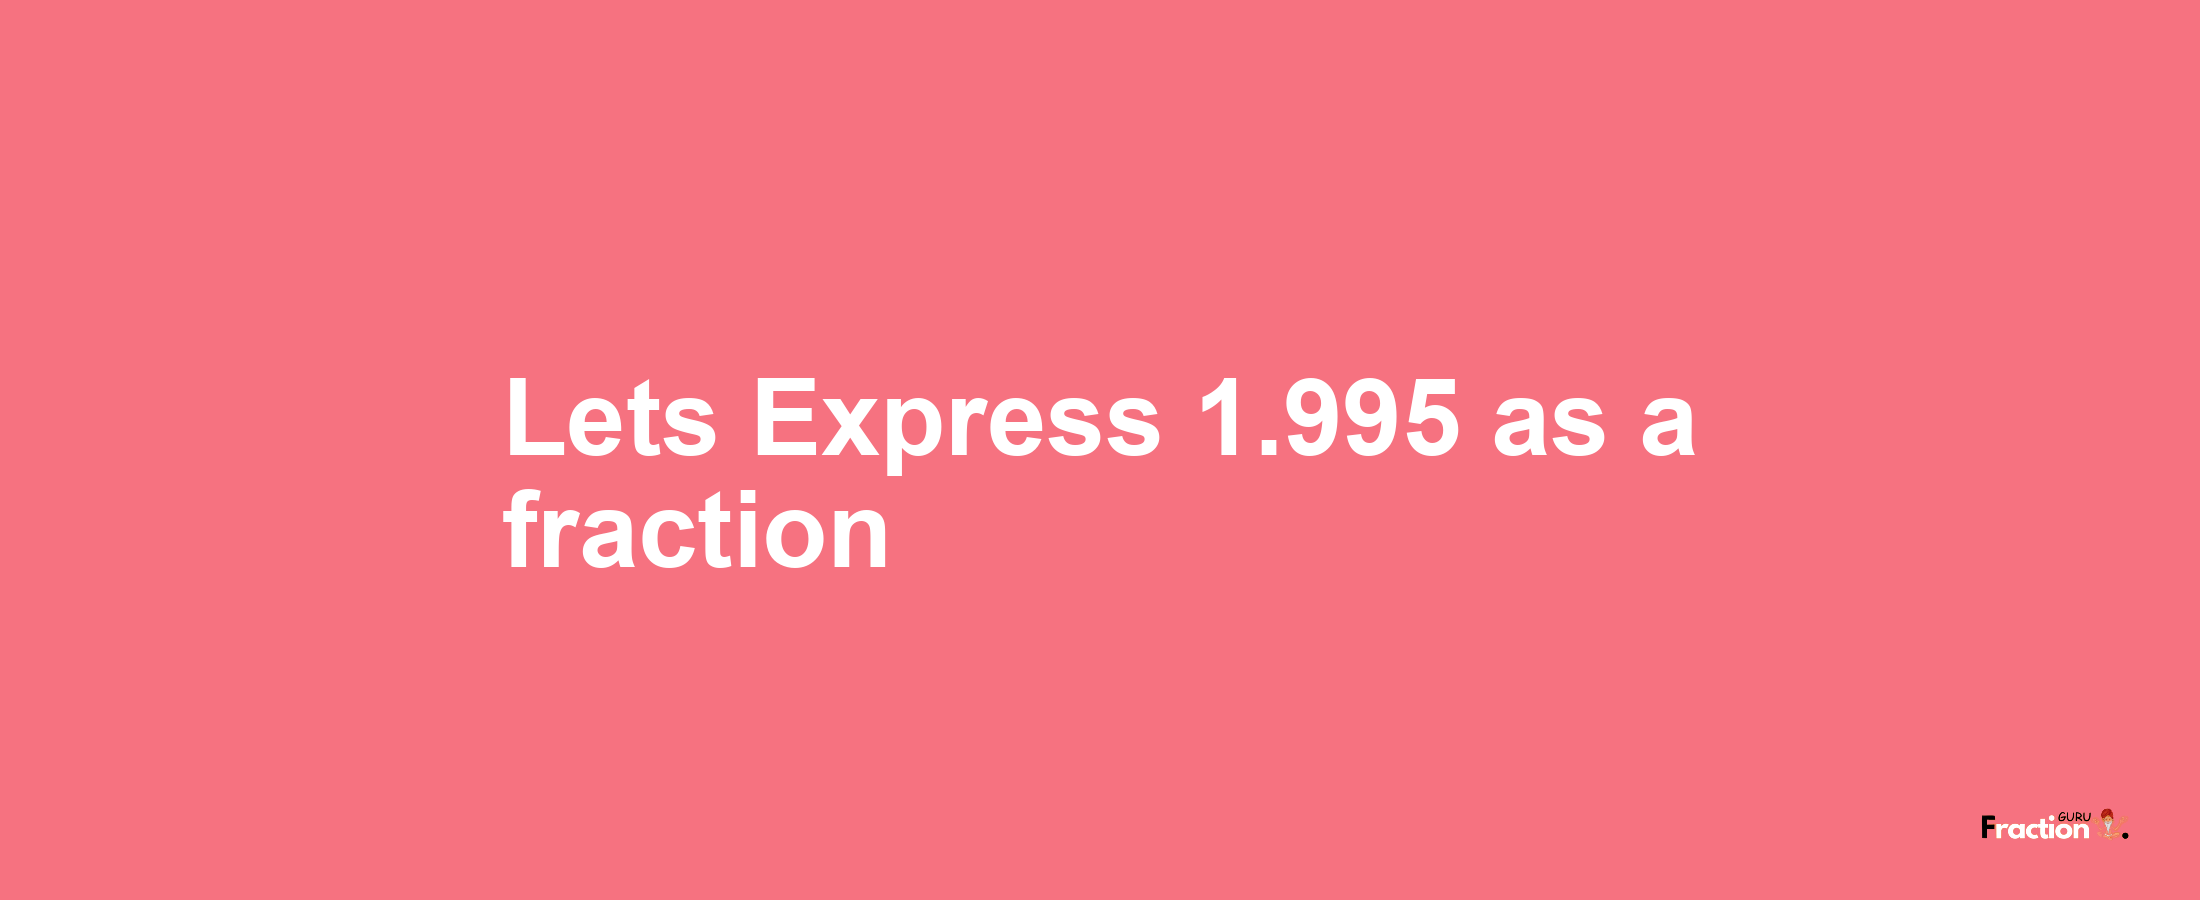 Lets Express 1.995 as afraction